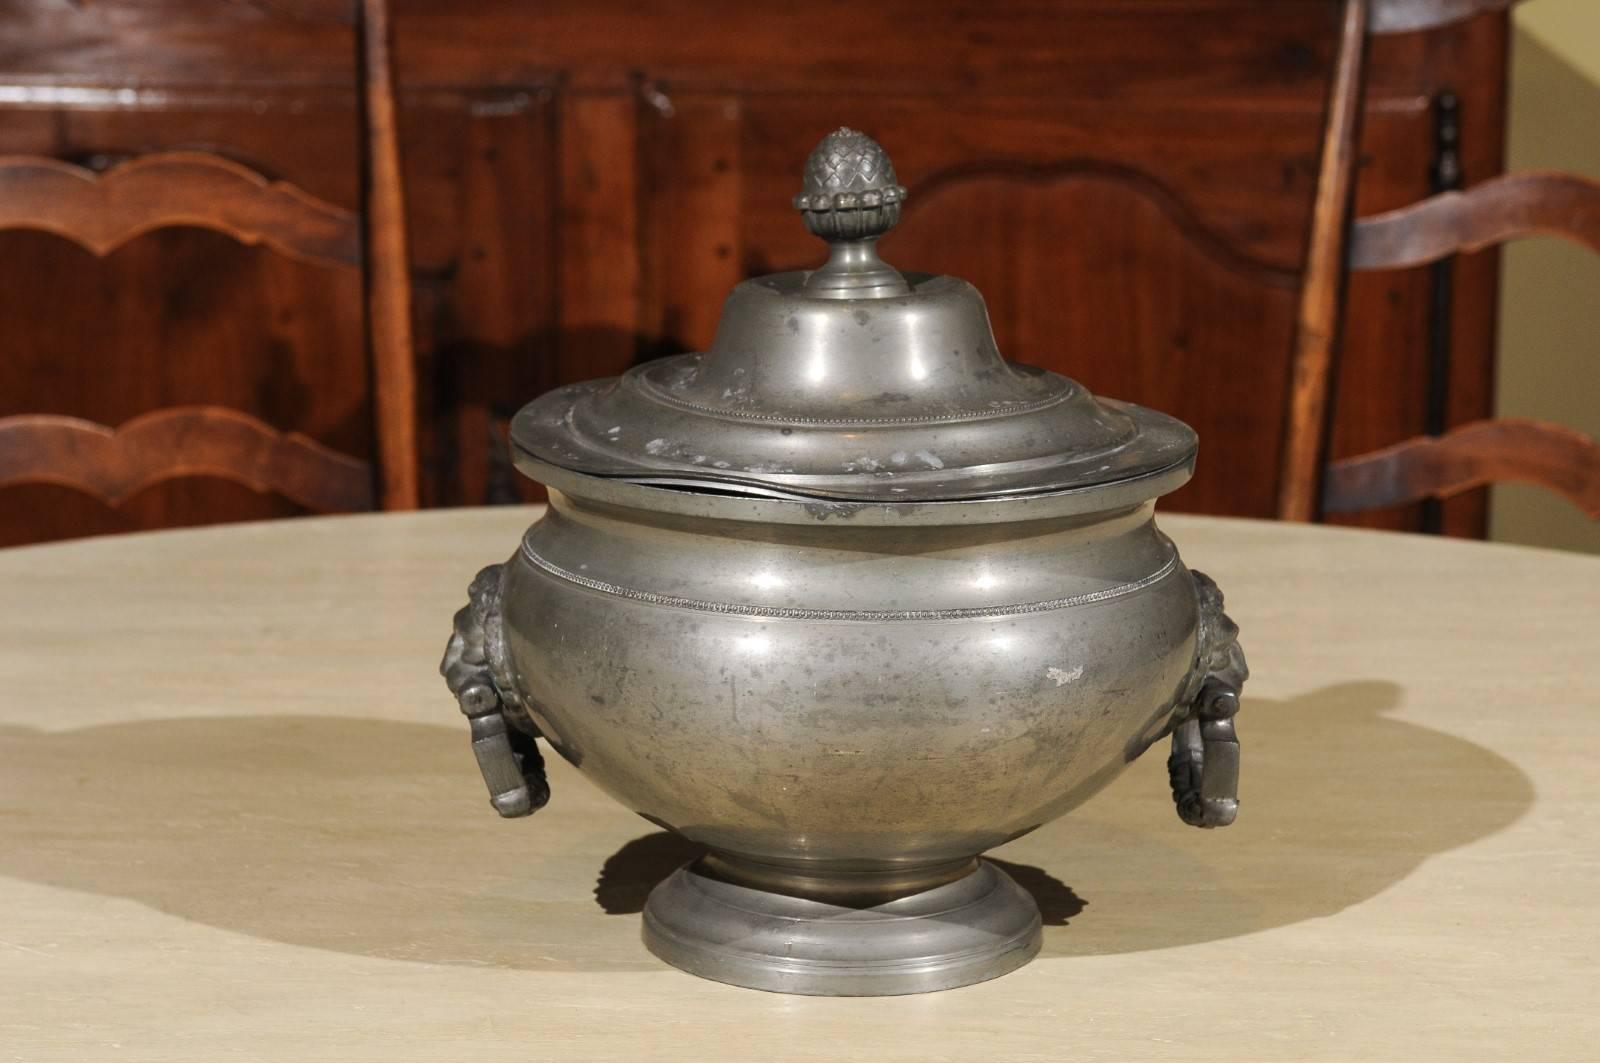 19th century covered Pewter Tureen, circa 1820
A very nice pewter Tureen with handsome lion heads at the handles and an acorn adornment for the lid. This tureen was bought in Brussels from our favourite pewter dealer.